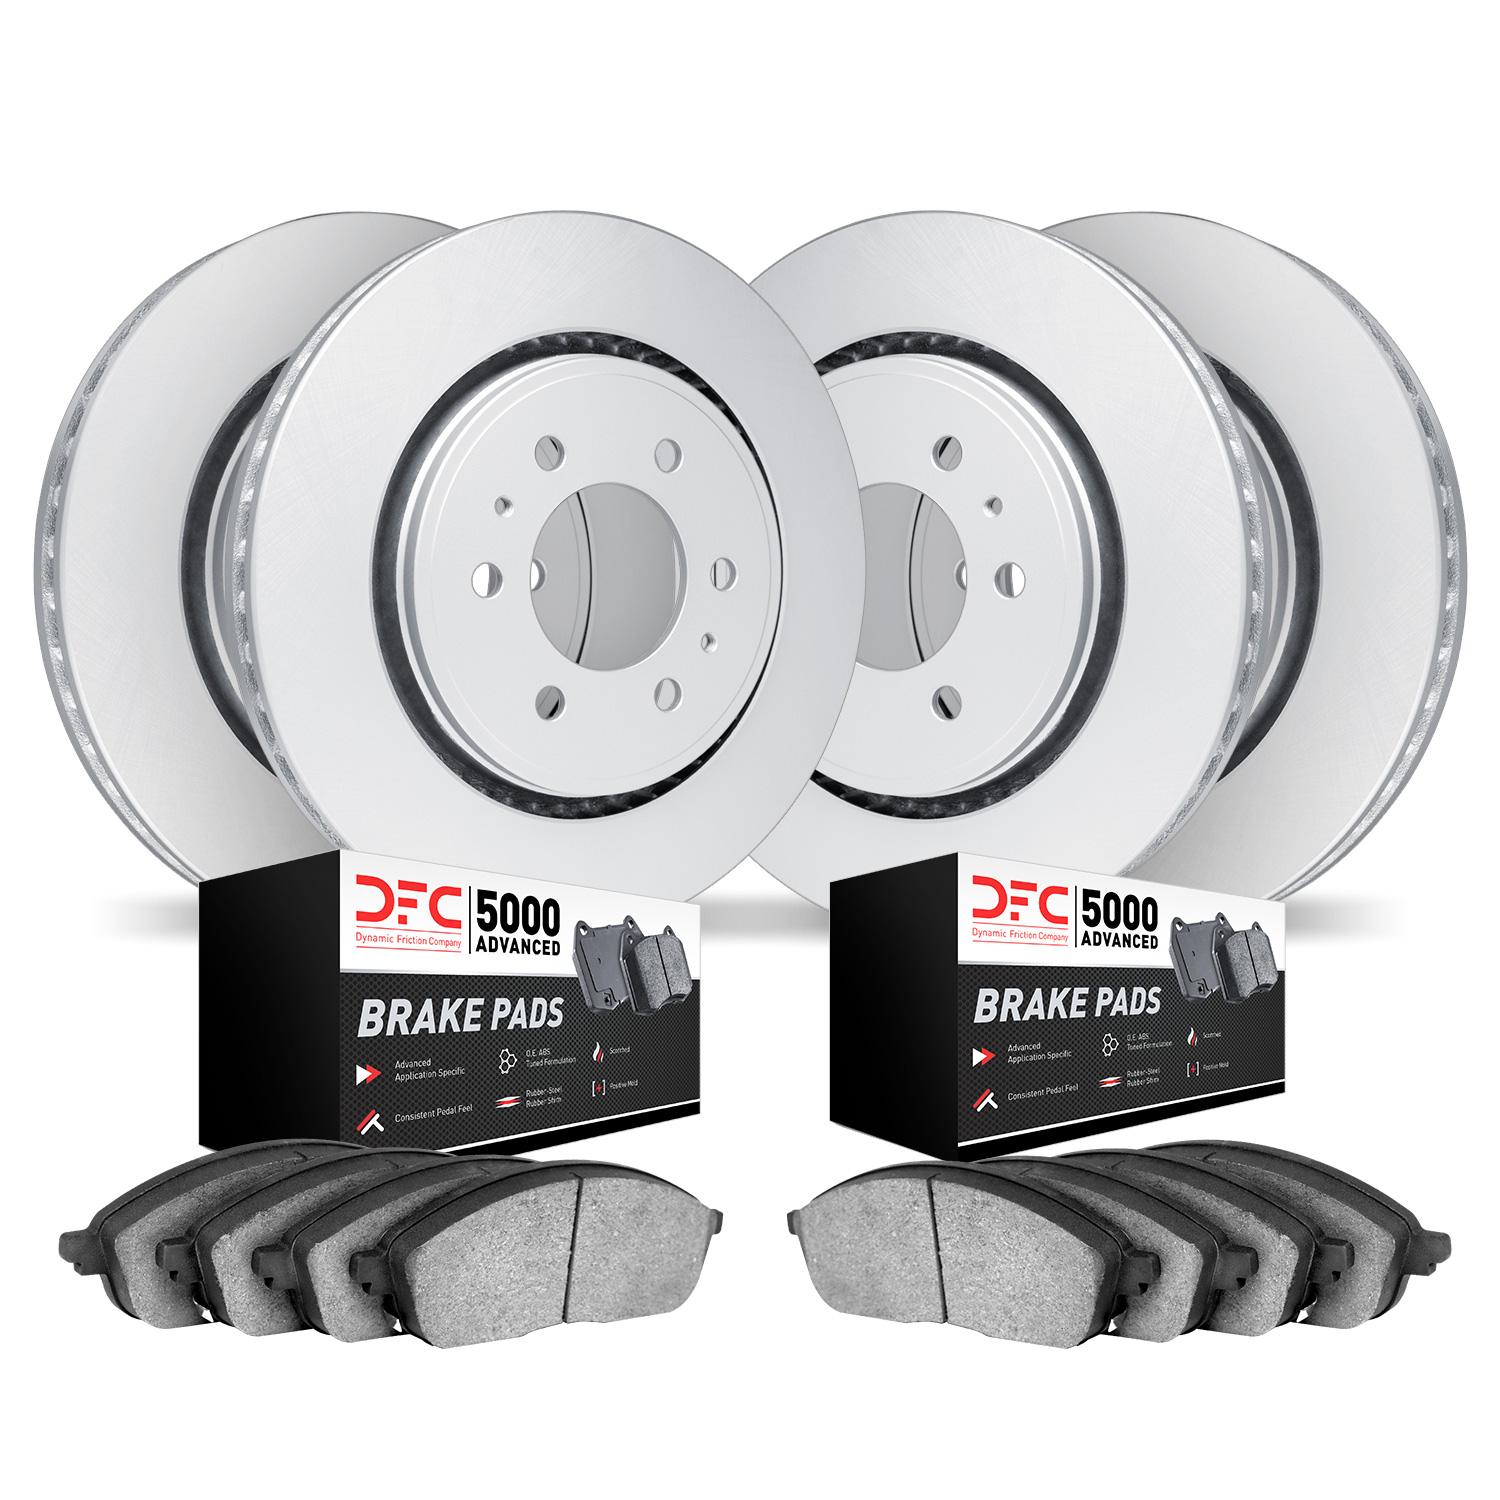 4504-54036 Geospec Brake Rotors w/5000 Advanced Brake Pads Kit, 2002-2006 Ford/Lincoln/Mercury/Mazda, Position: Front and Rear